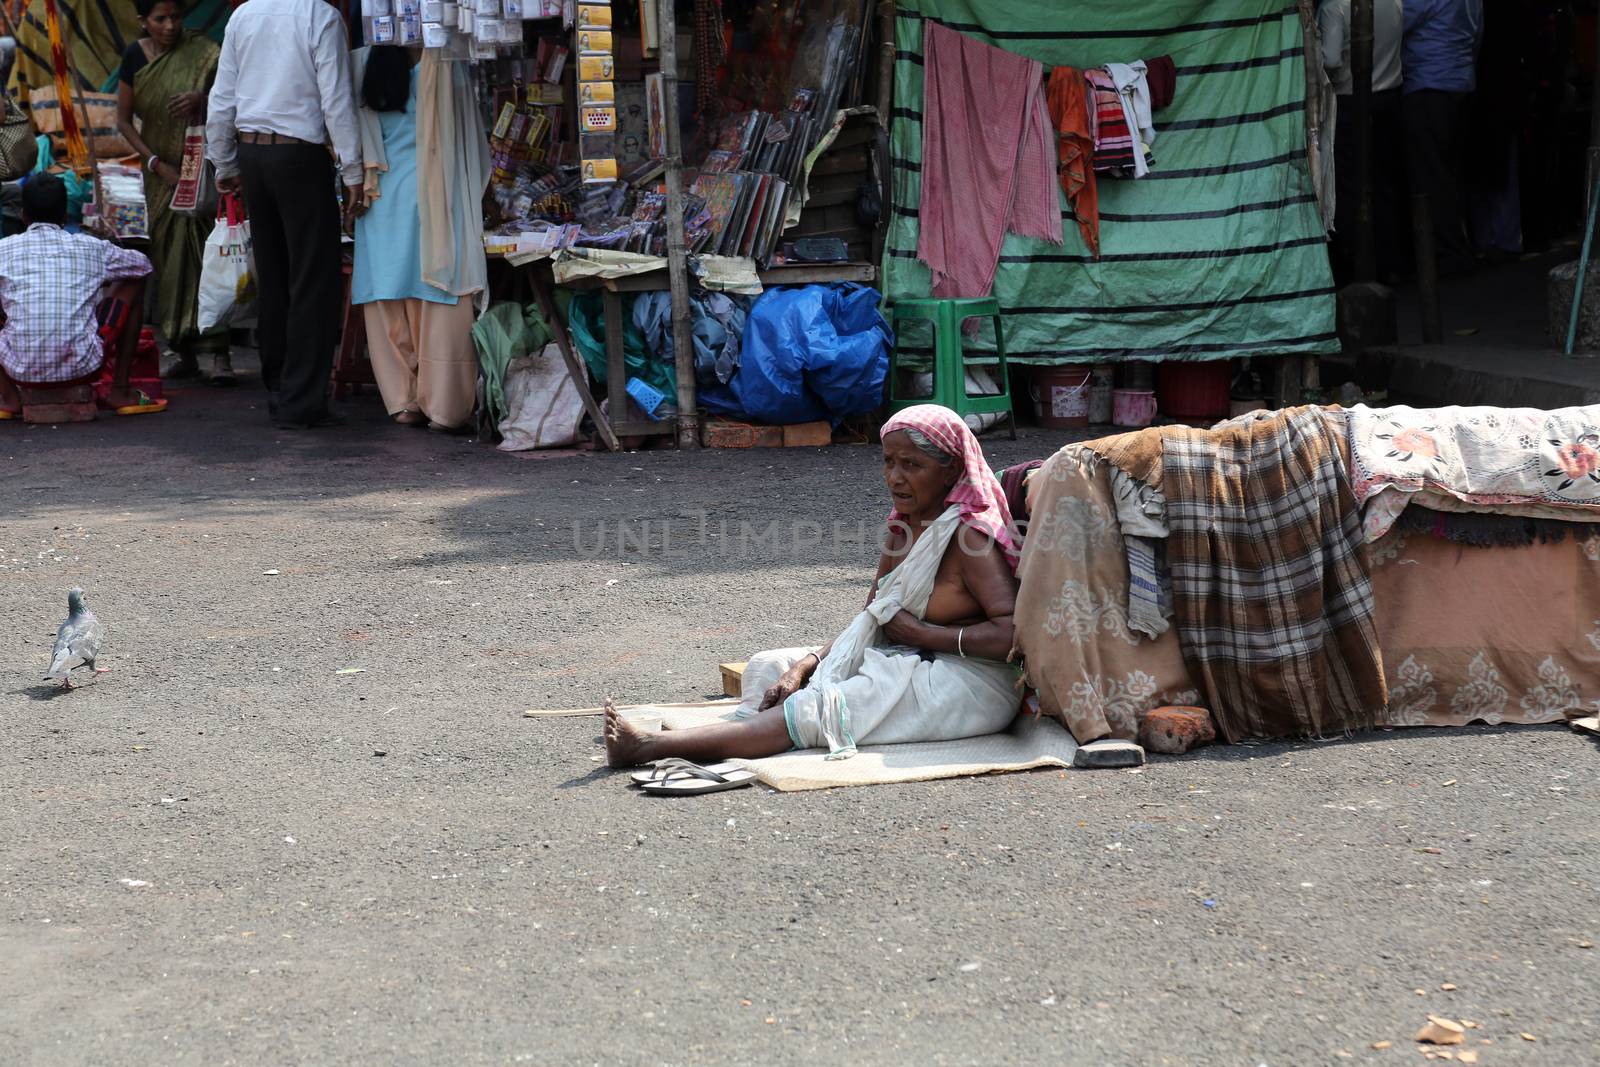 Beggars in front of Nirmal, Hriday, Home for the Sick and Dying Destitutes, one of the buildings established by the Mother Teresa and run by the Missionaries of Charity in Kolkata, India on February 10, 2014.